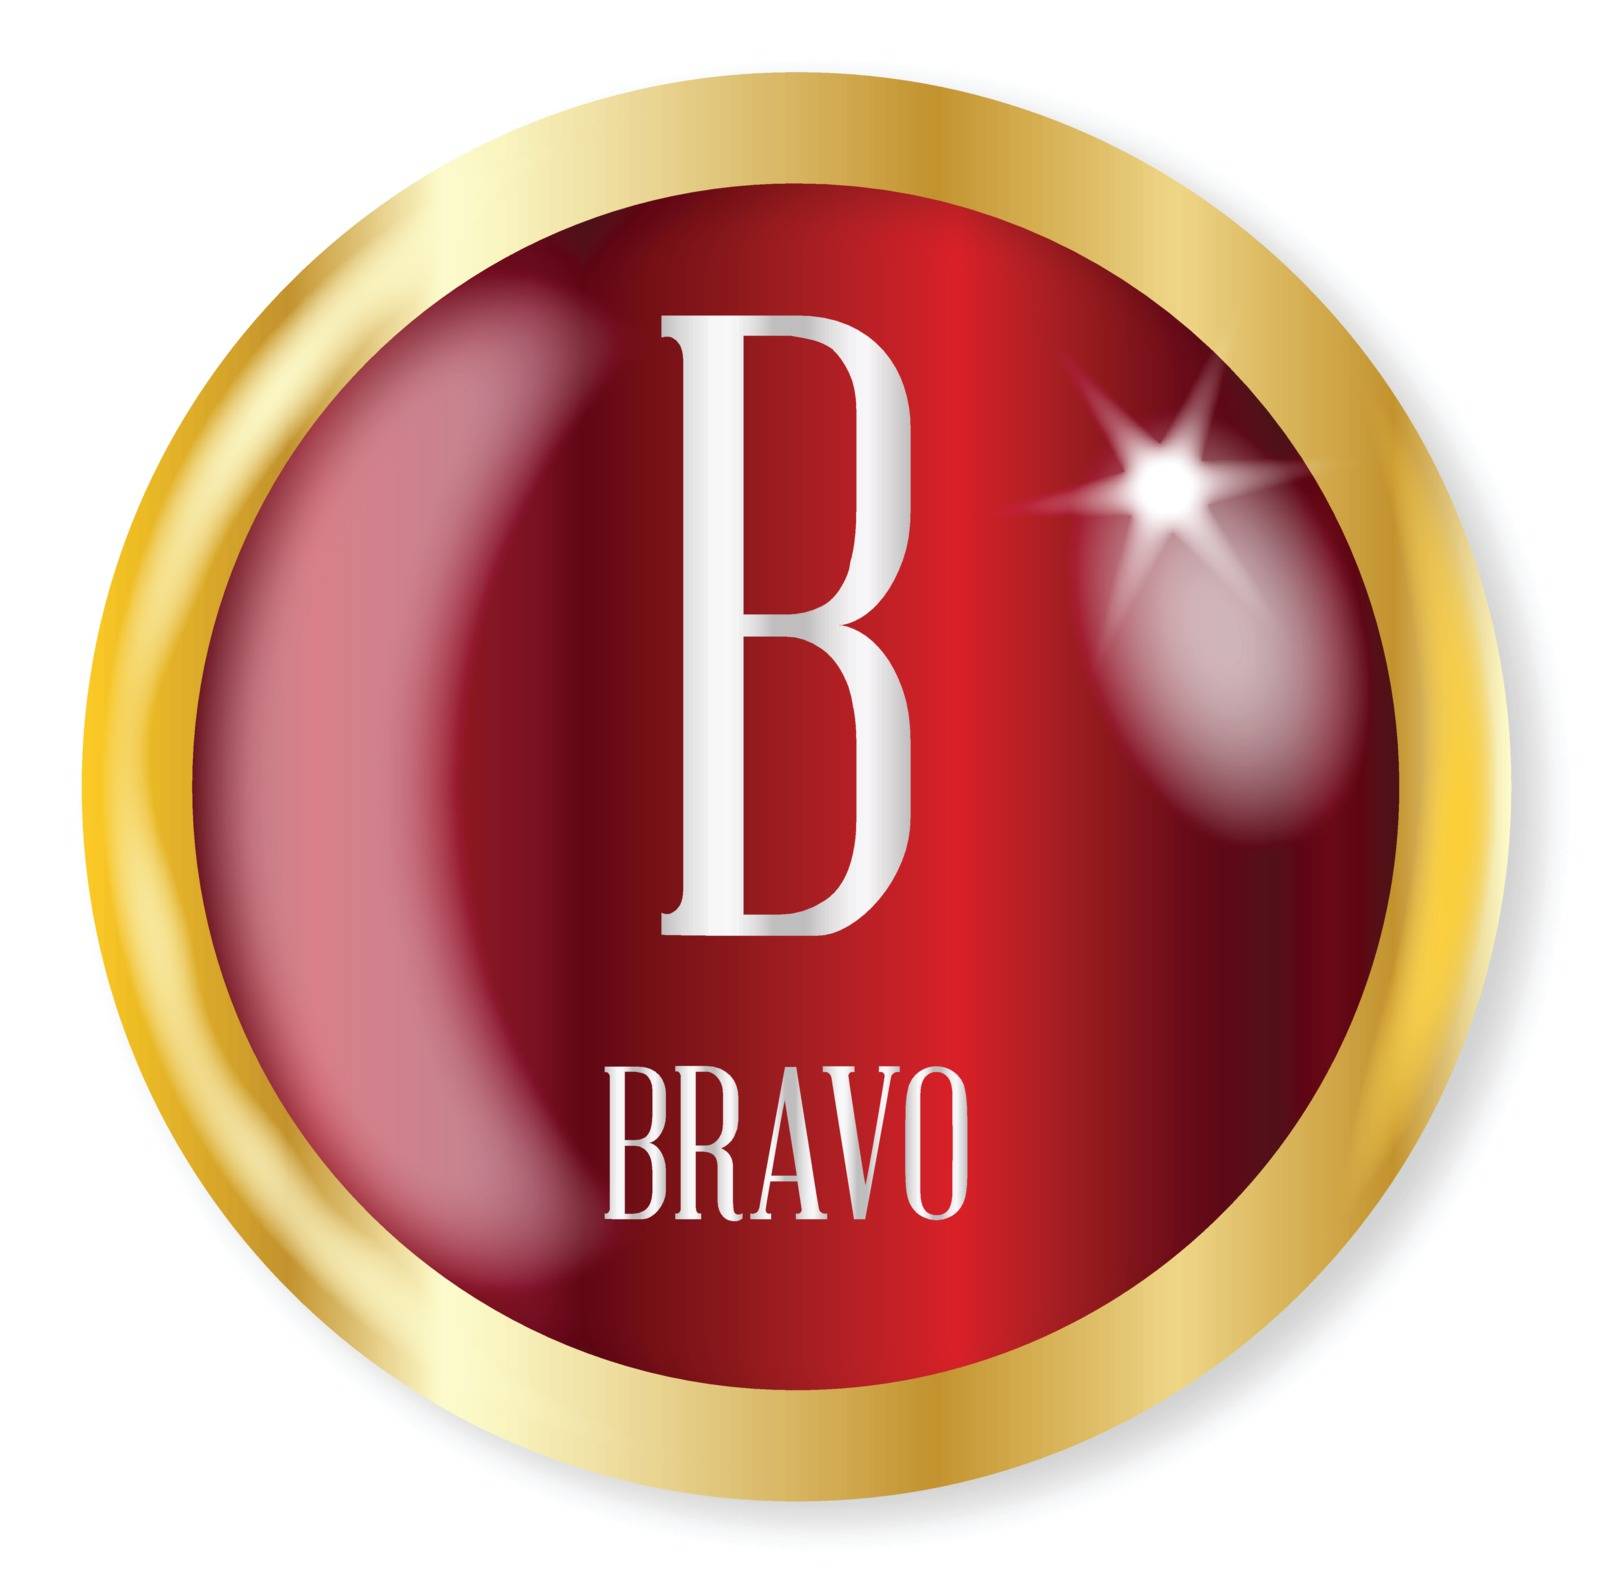 B for Bravobutton from the NATO phonetic alphabet with a gold metal circular border over a white background